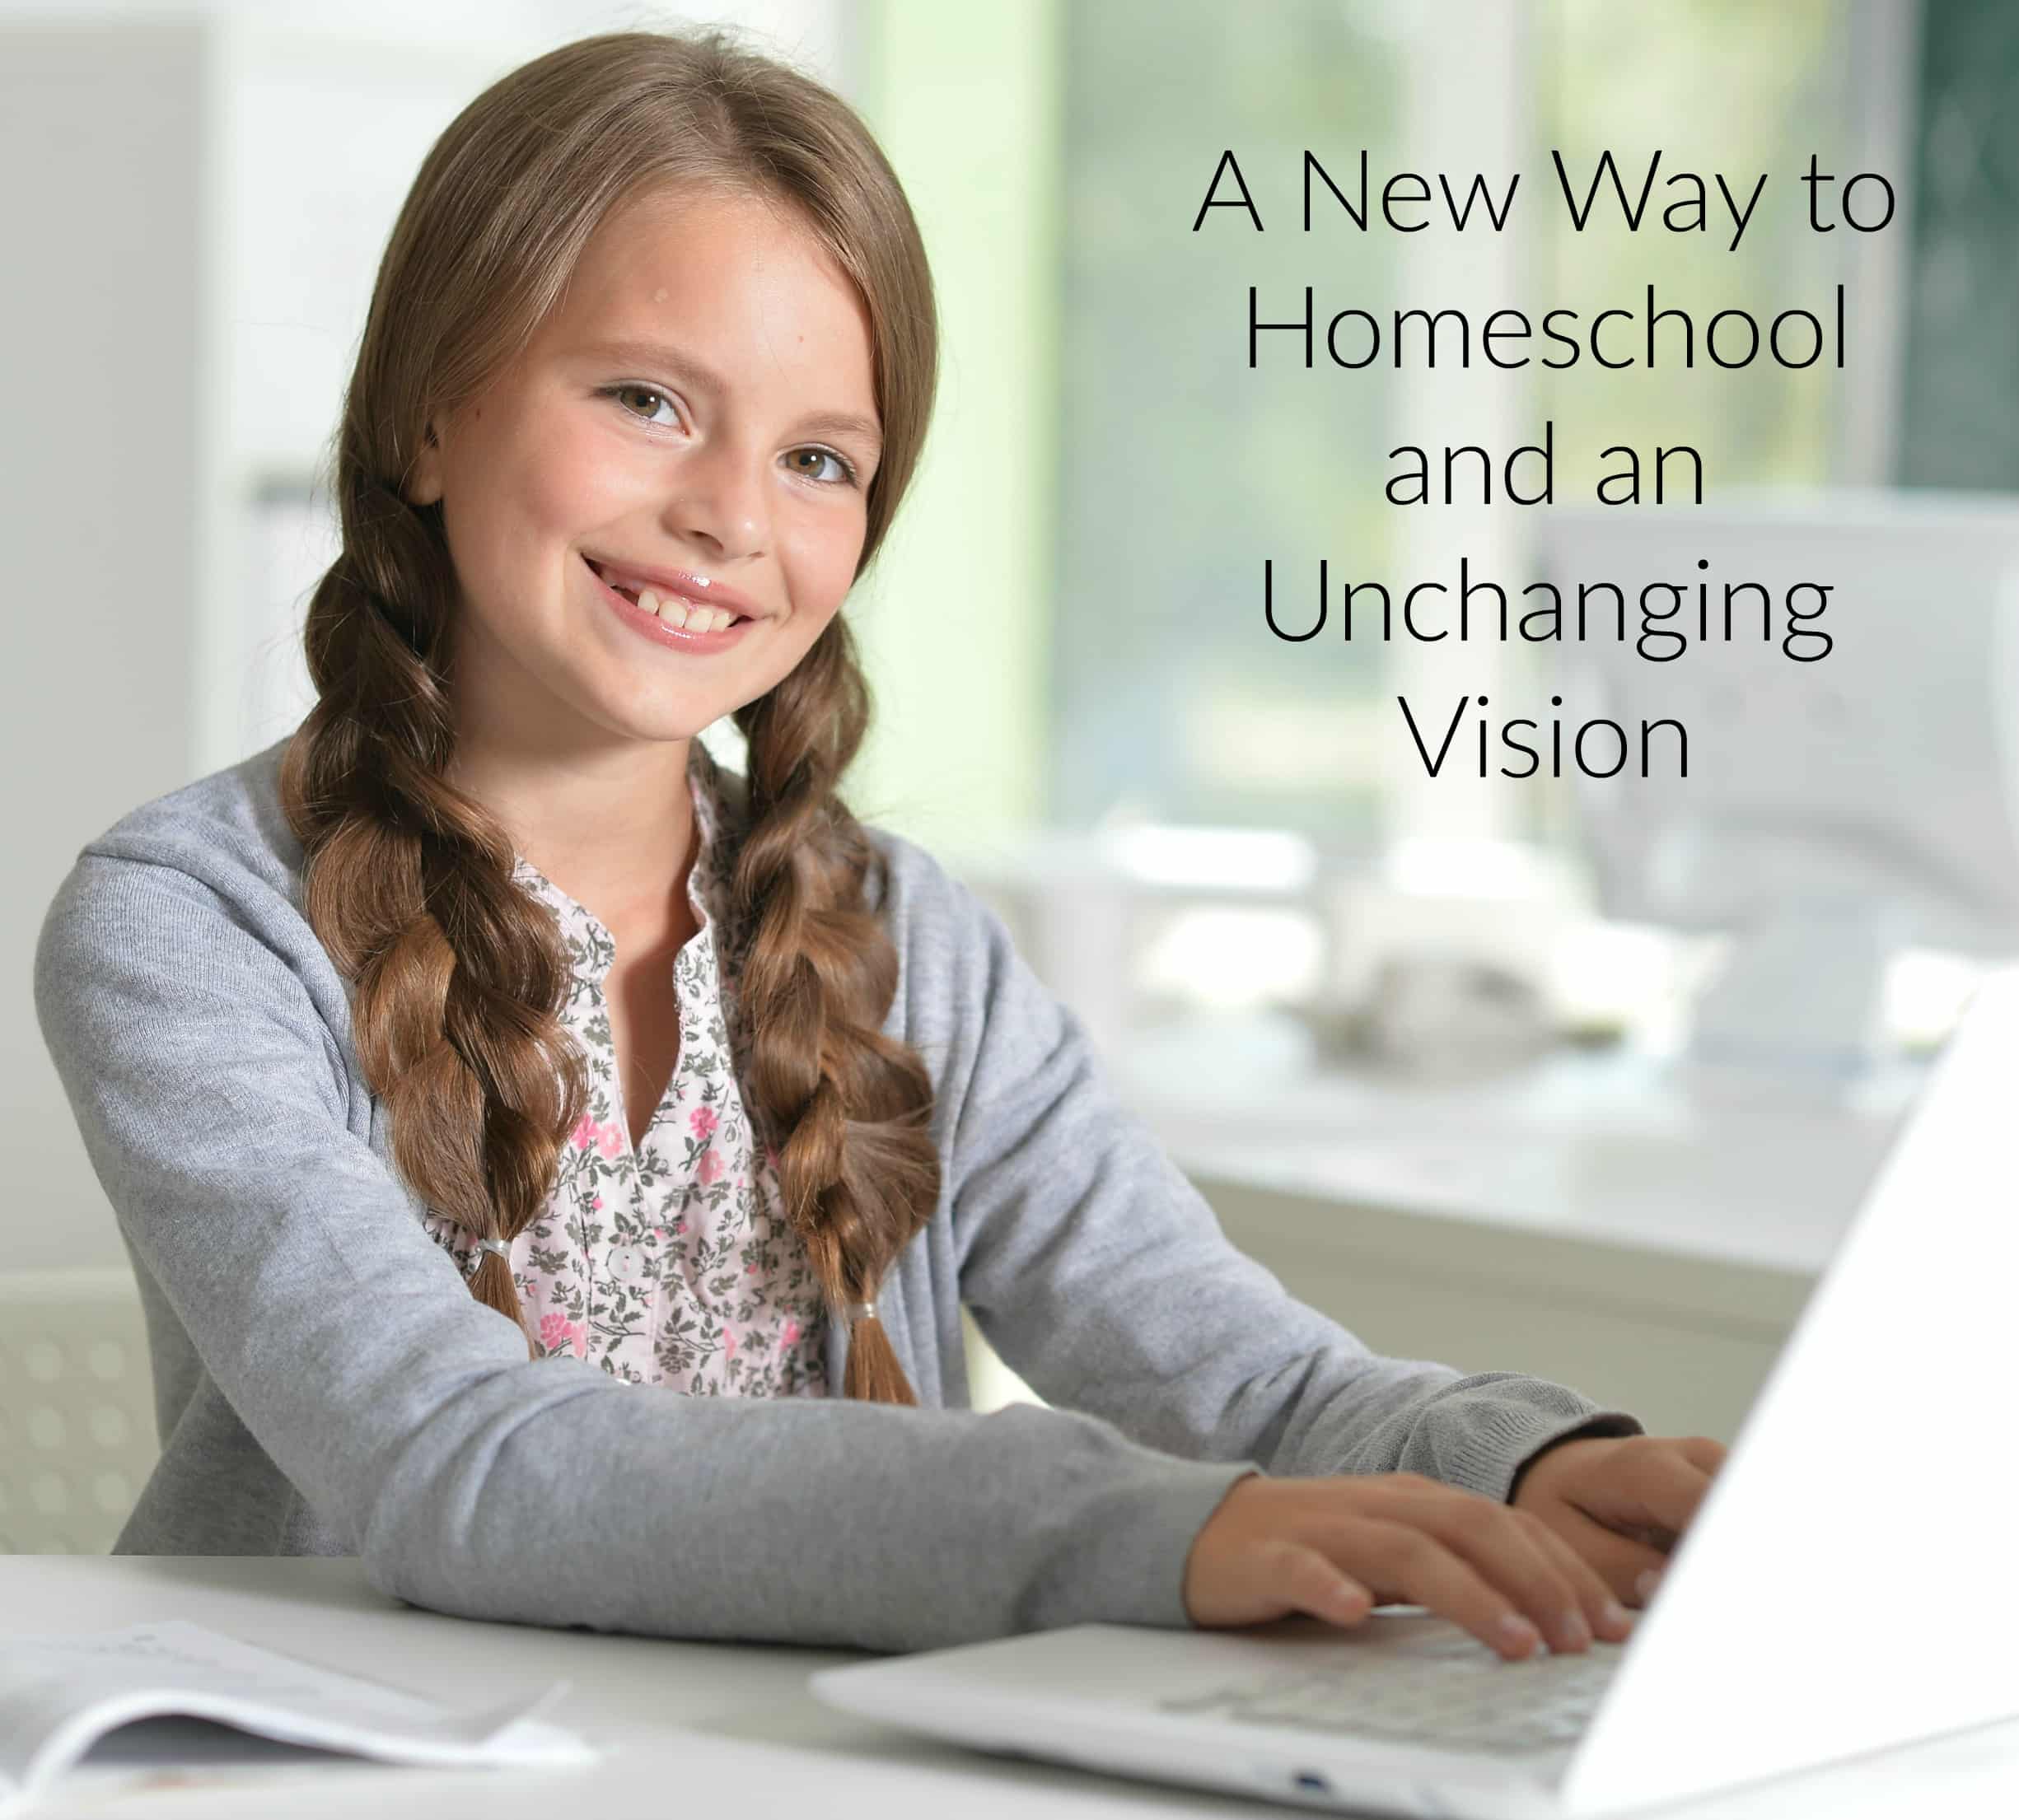 A New Way to Homeschool and an Unchanging Vision